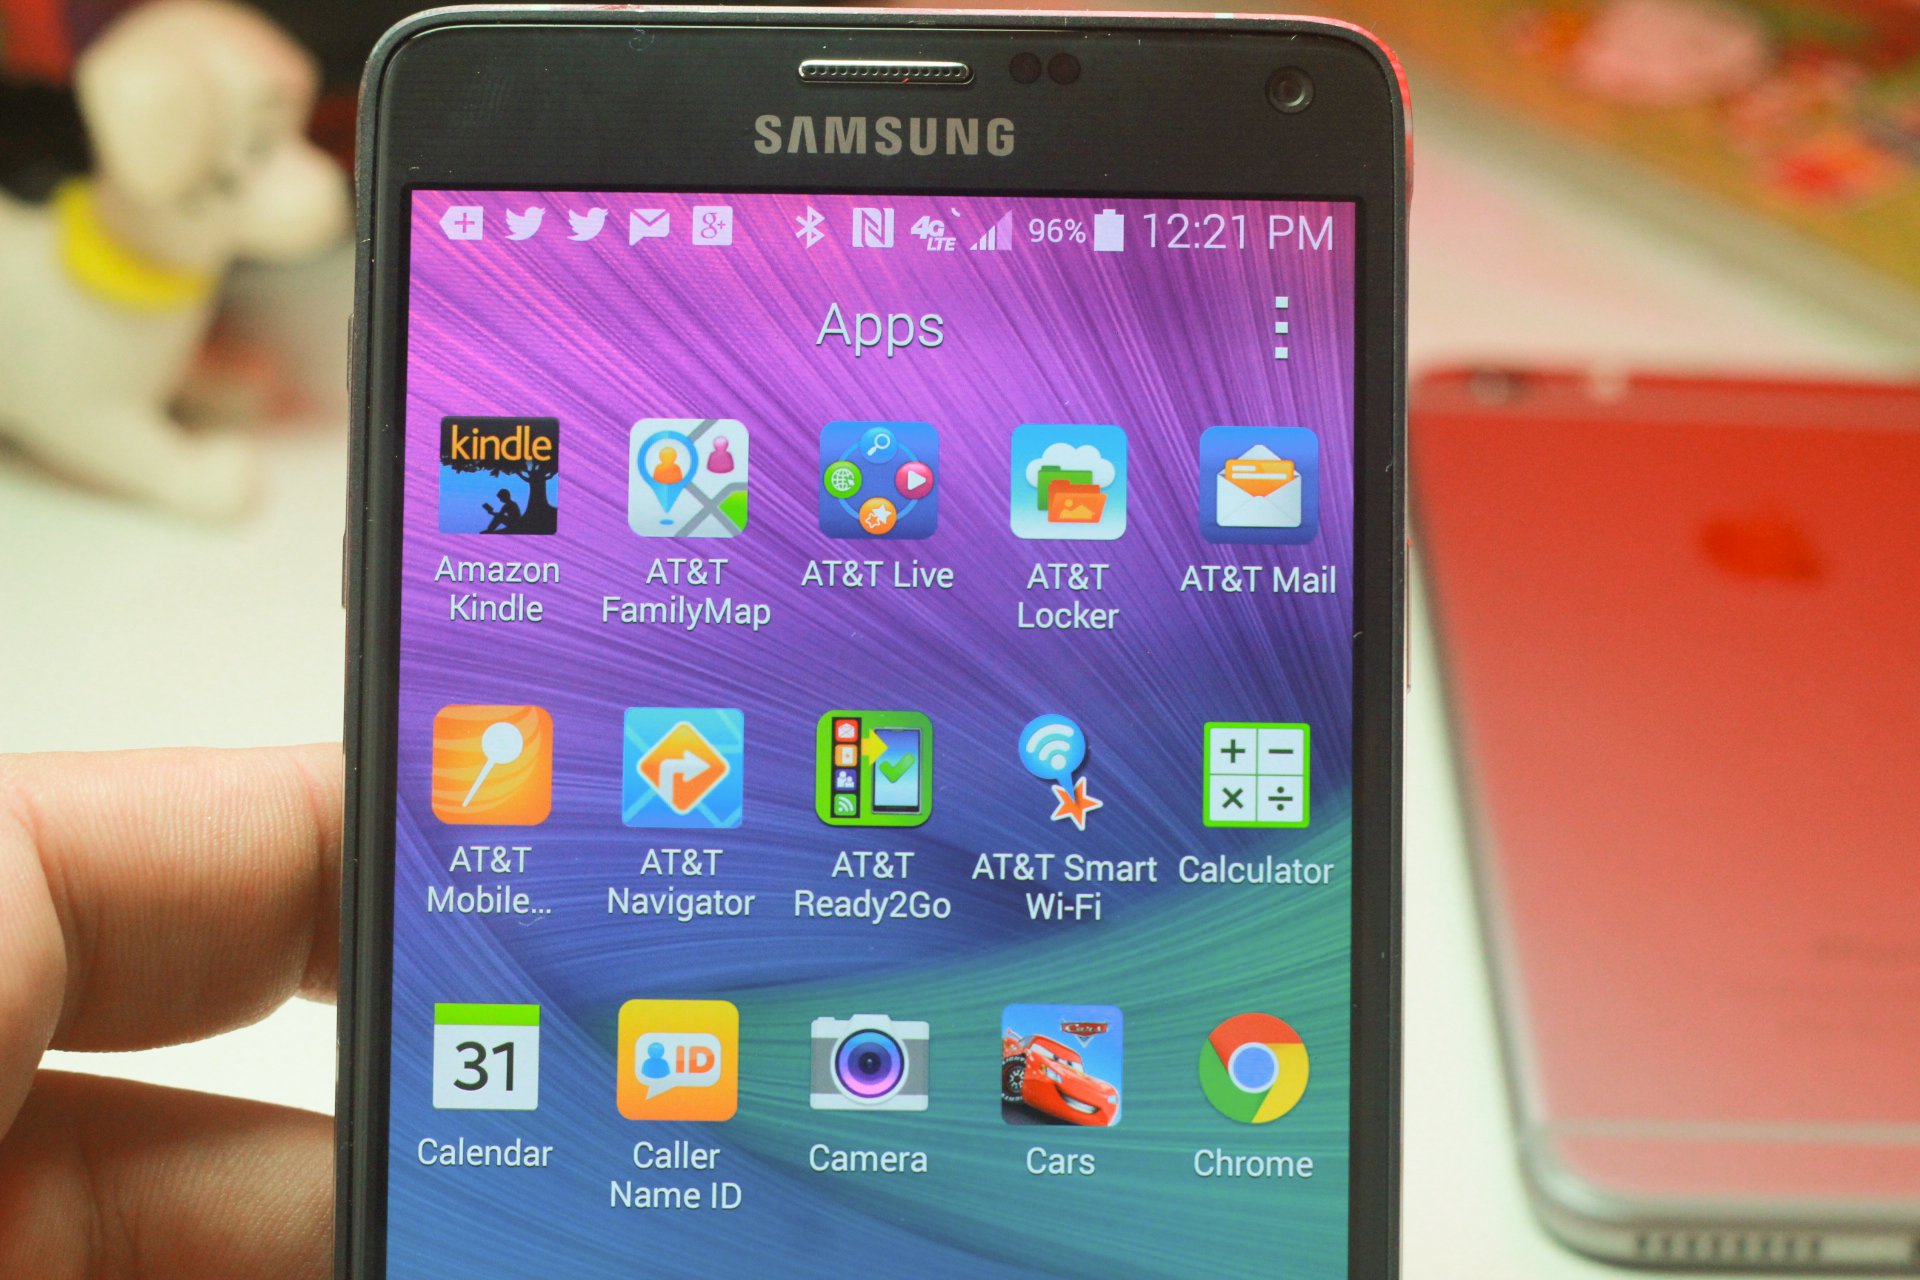 Samsung Galaxy Note 4 refurbished batteries get recalled due to overheating concerns